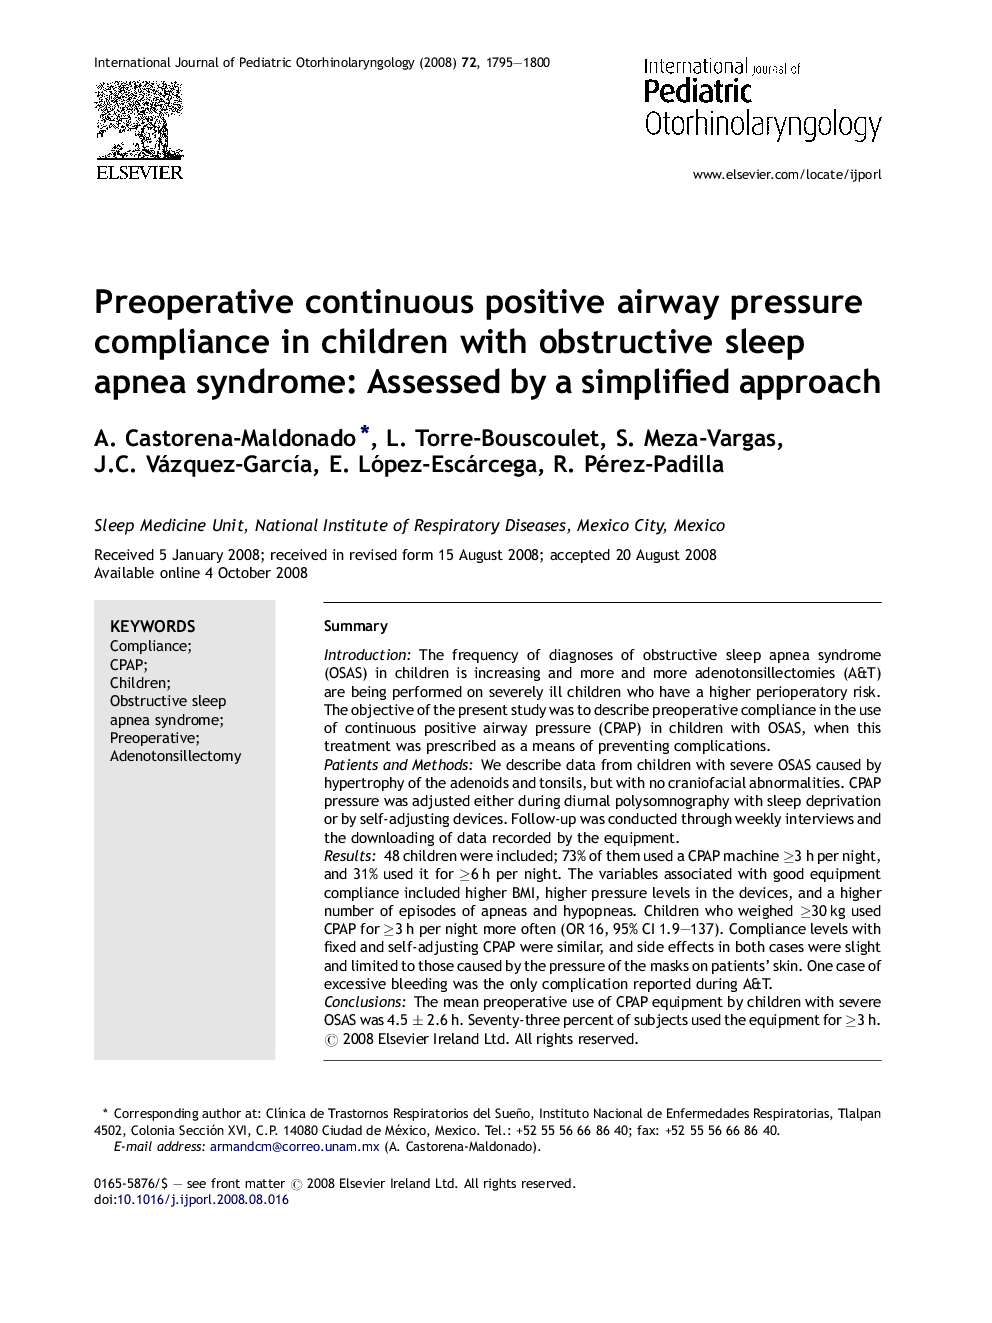 Preoperative continuous positive airway pressure compliance in children with obstructive sleep apnea syndrome: Assessed by a simplified approach